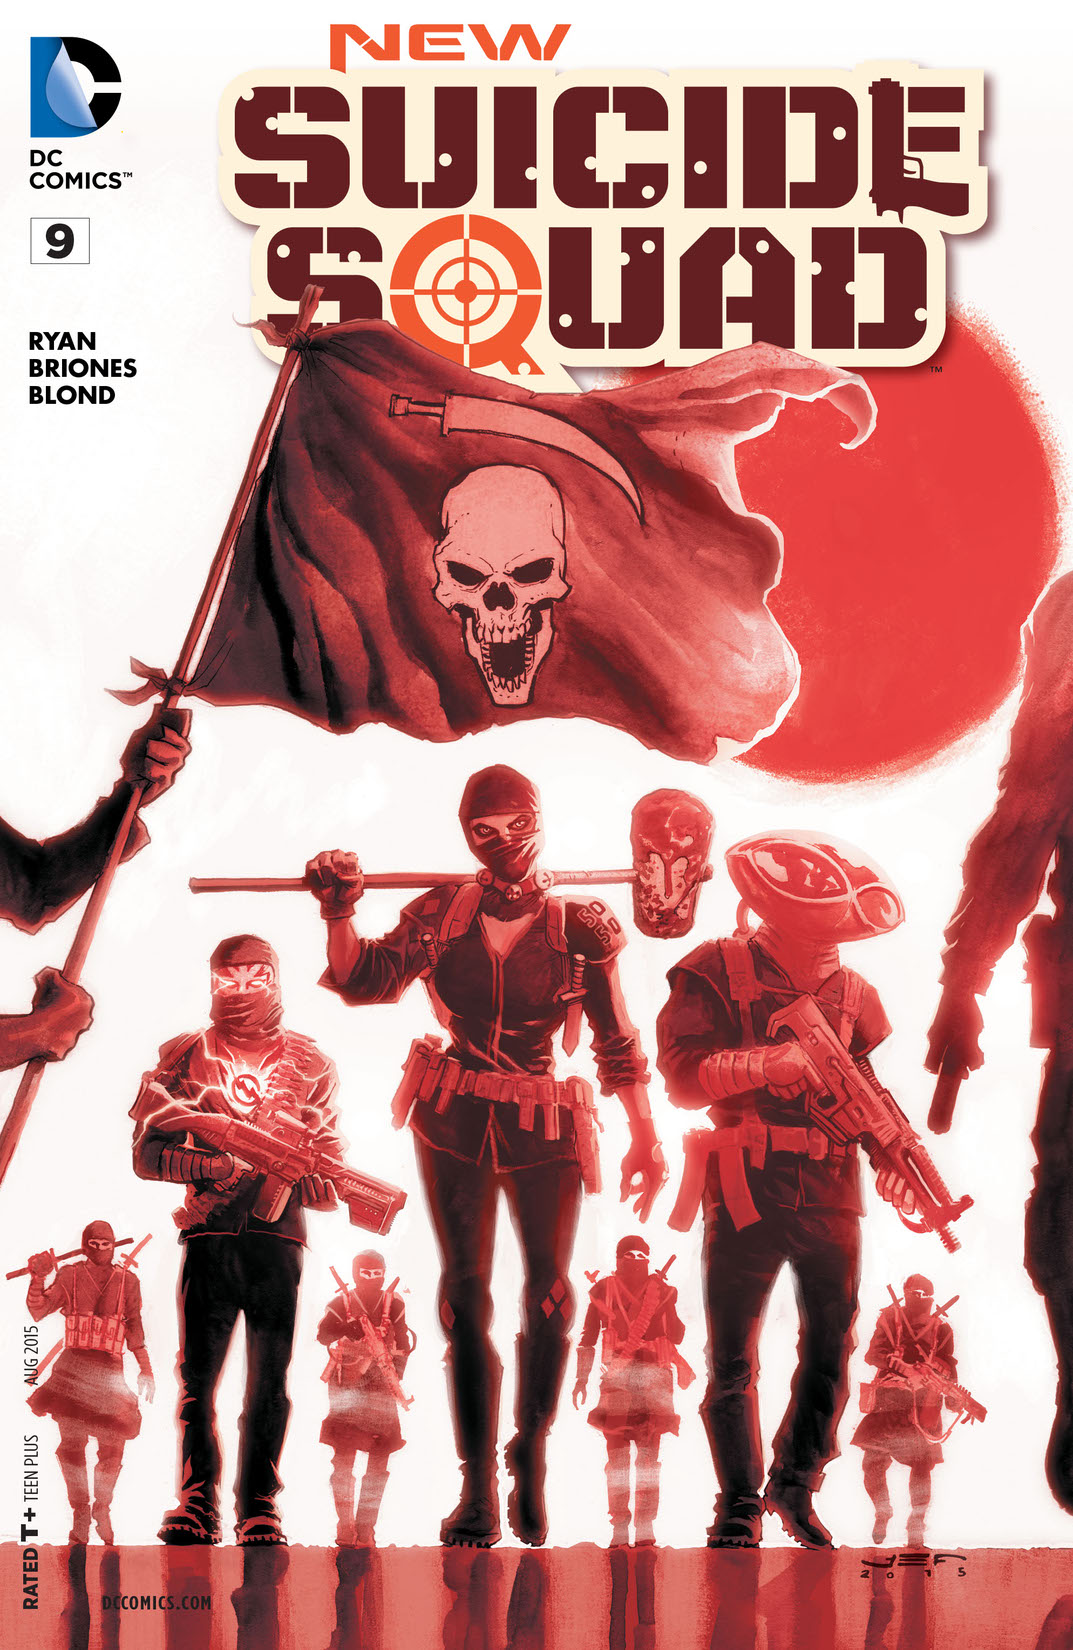 New Suicide Squad #9 preview images